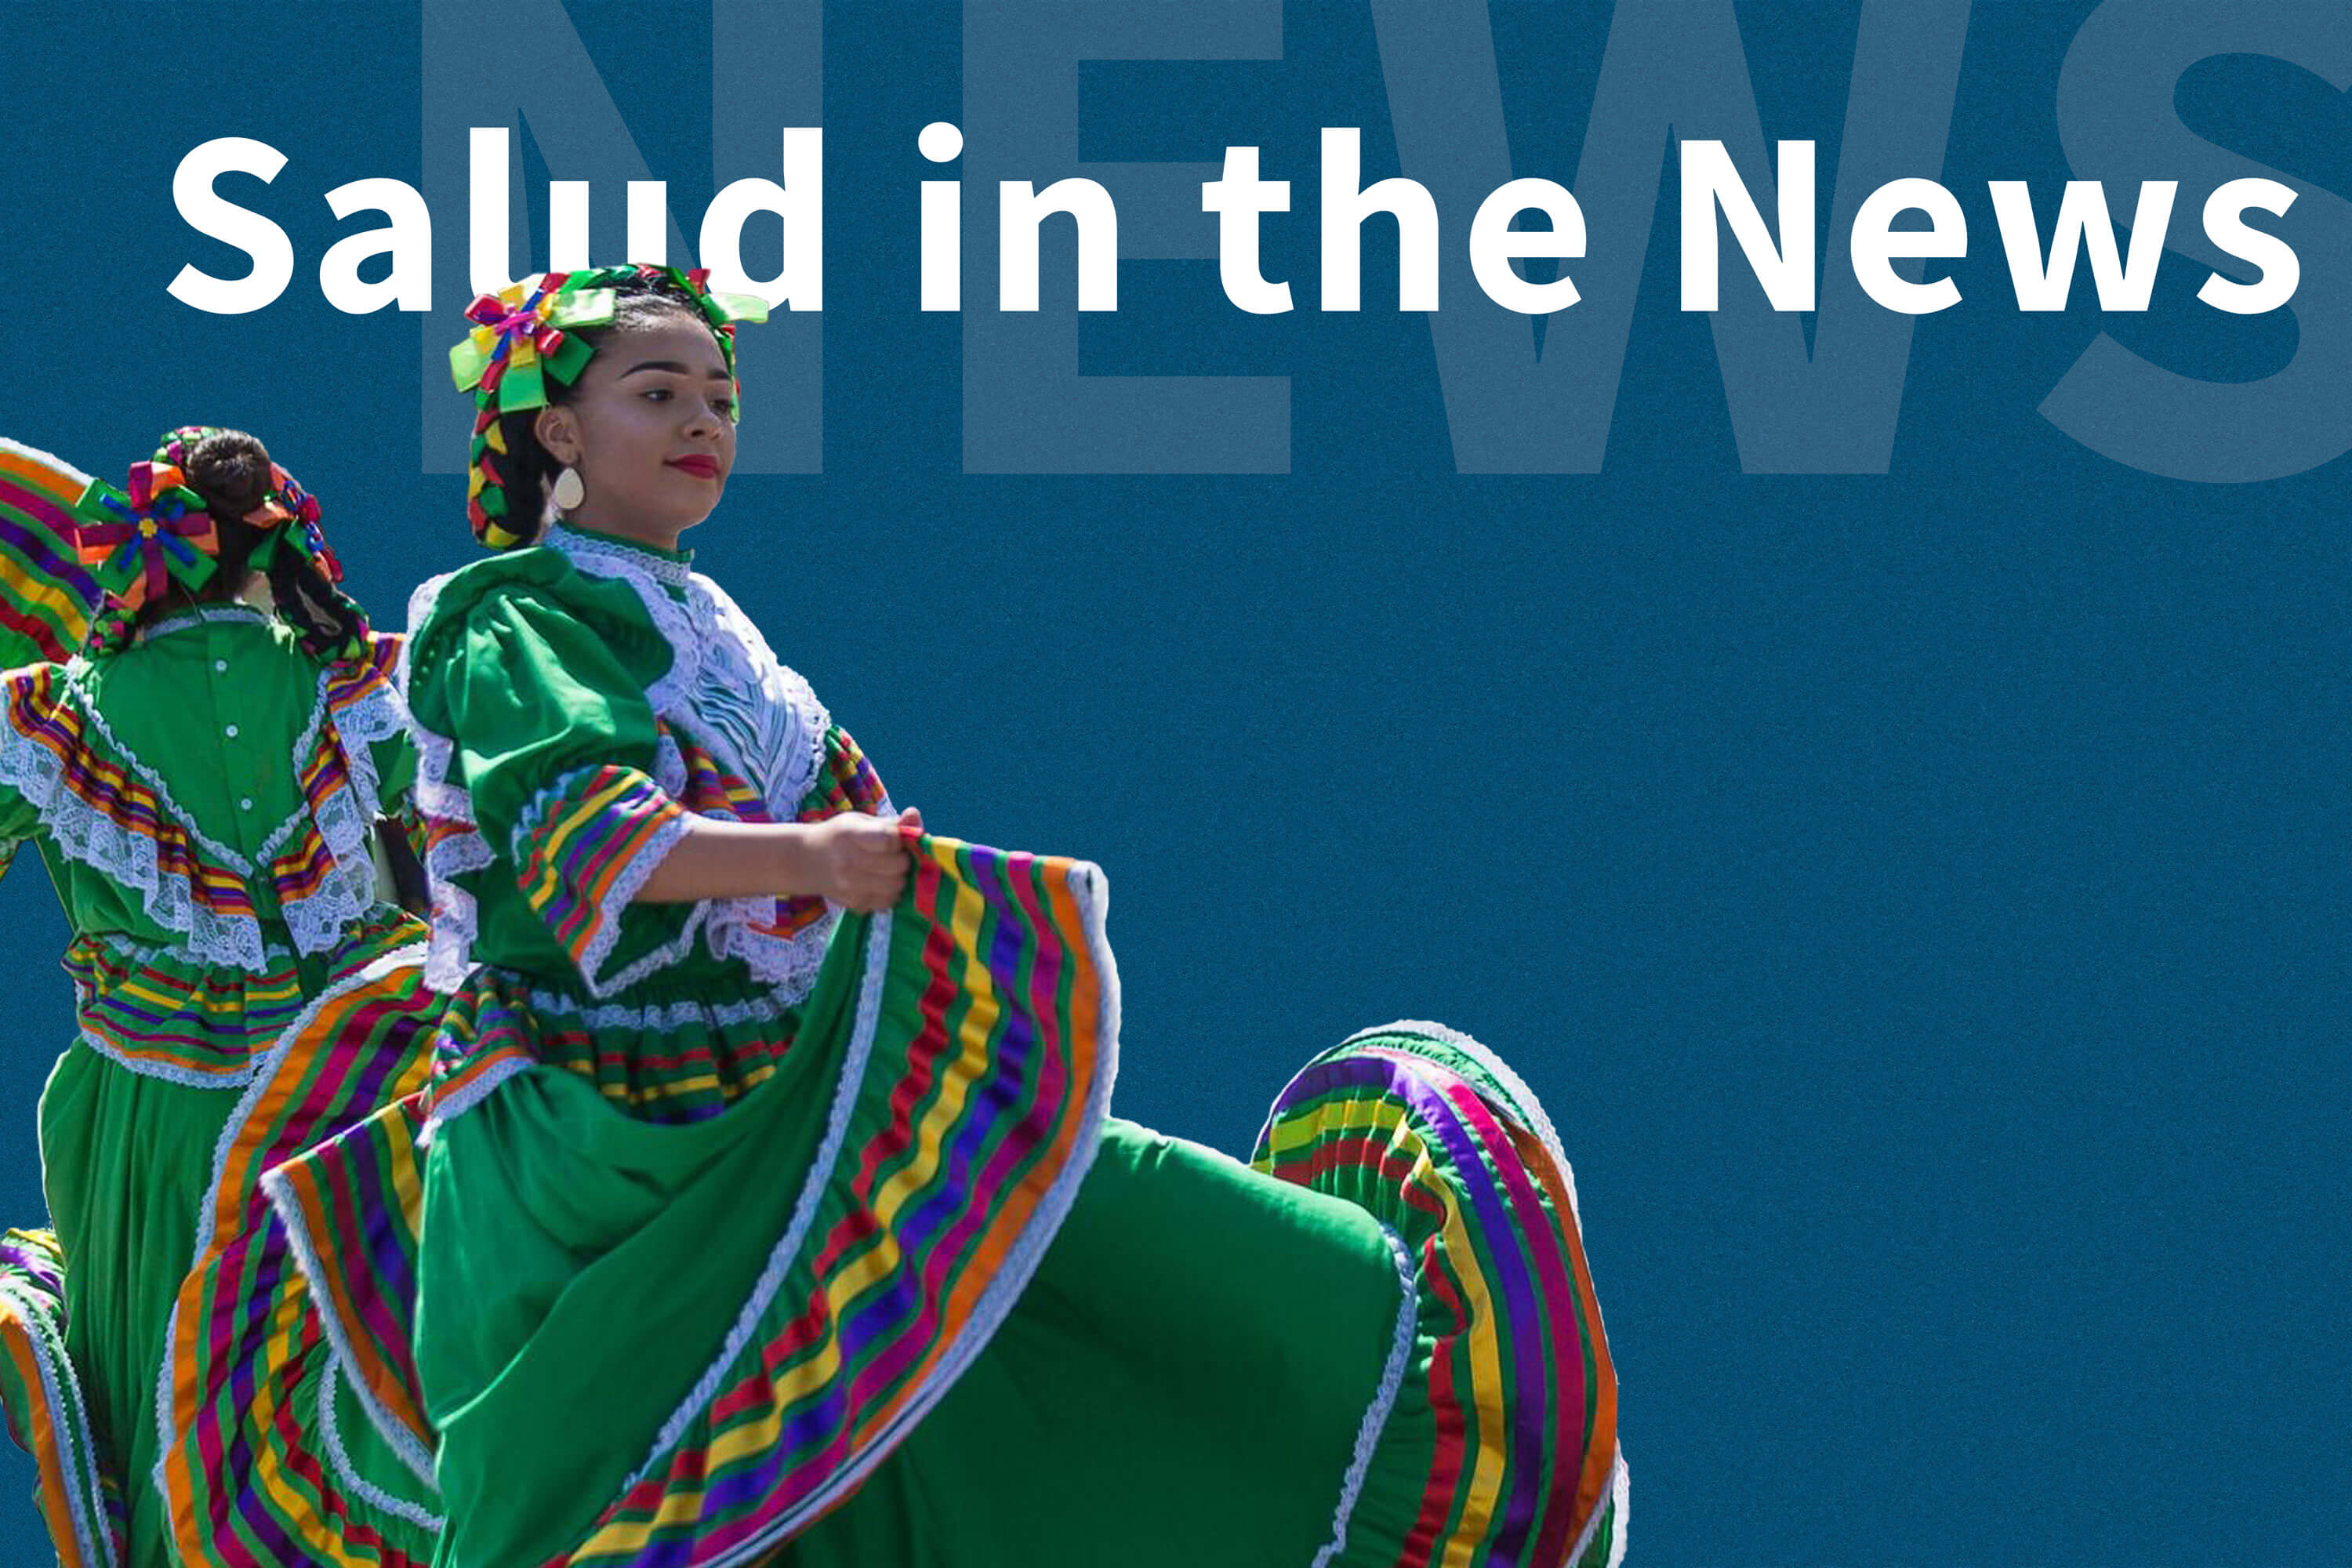 Two Latina women, wearing colorful traditional Mexican dresses, dancing with words "Salud in the News" behind their image.